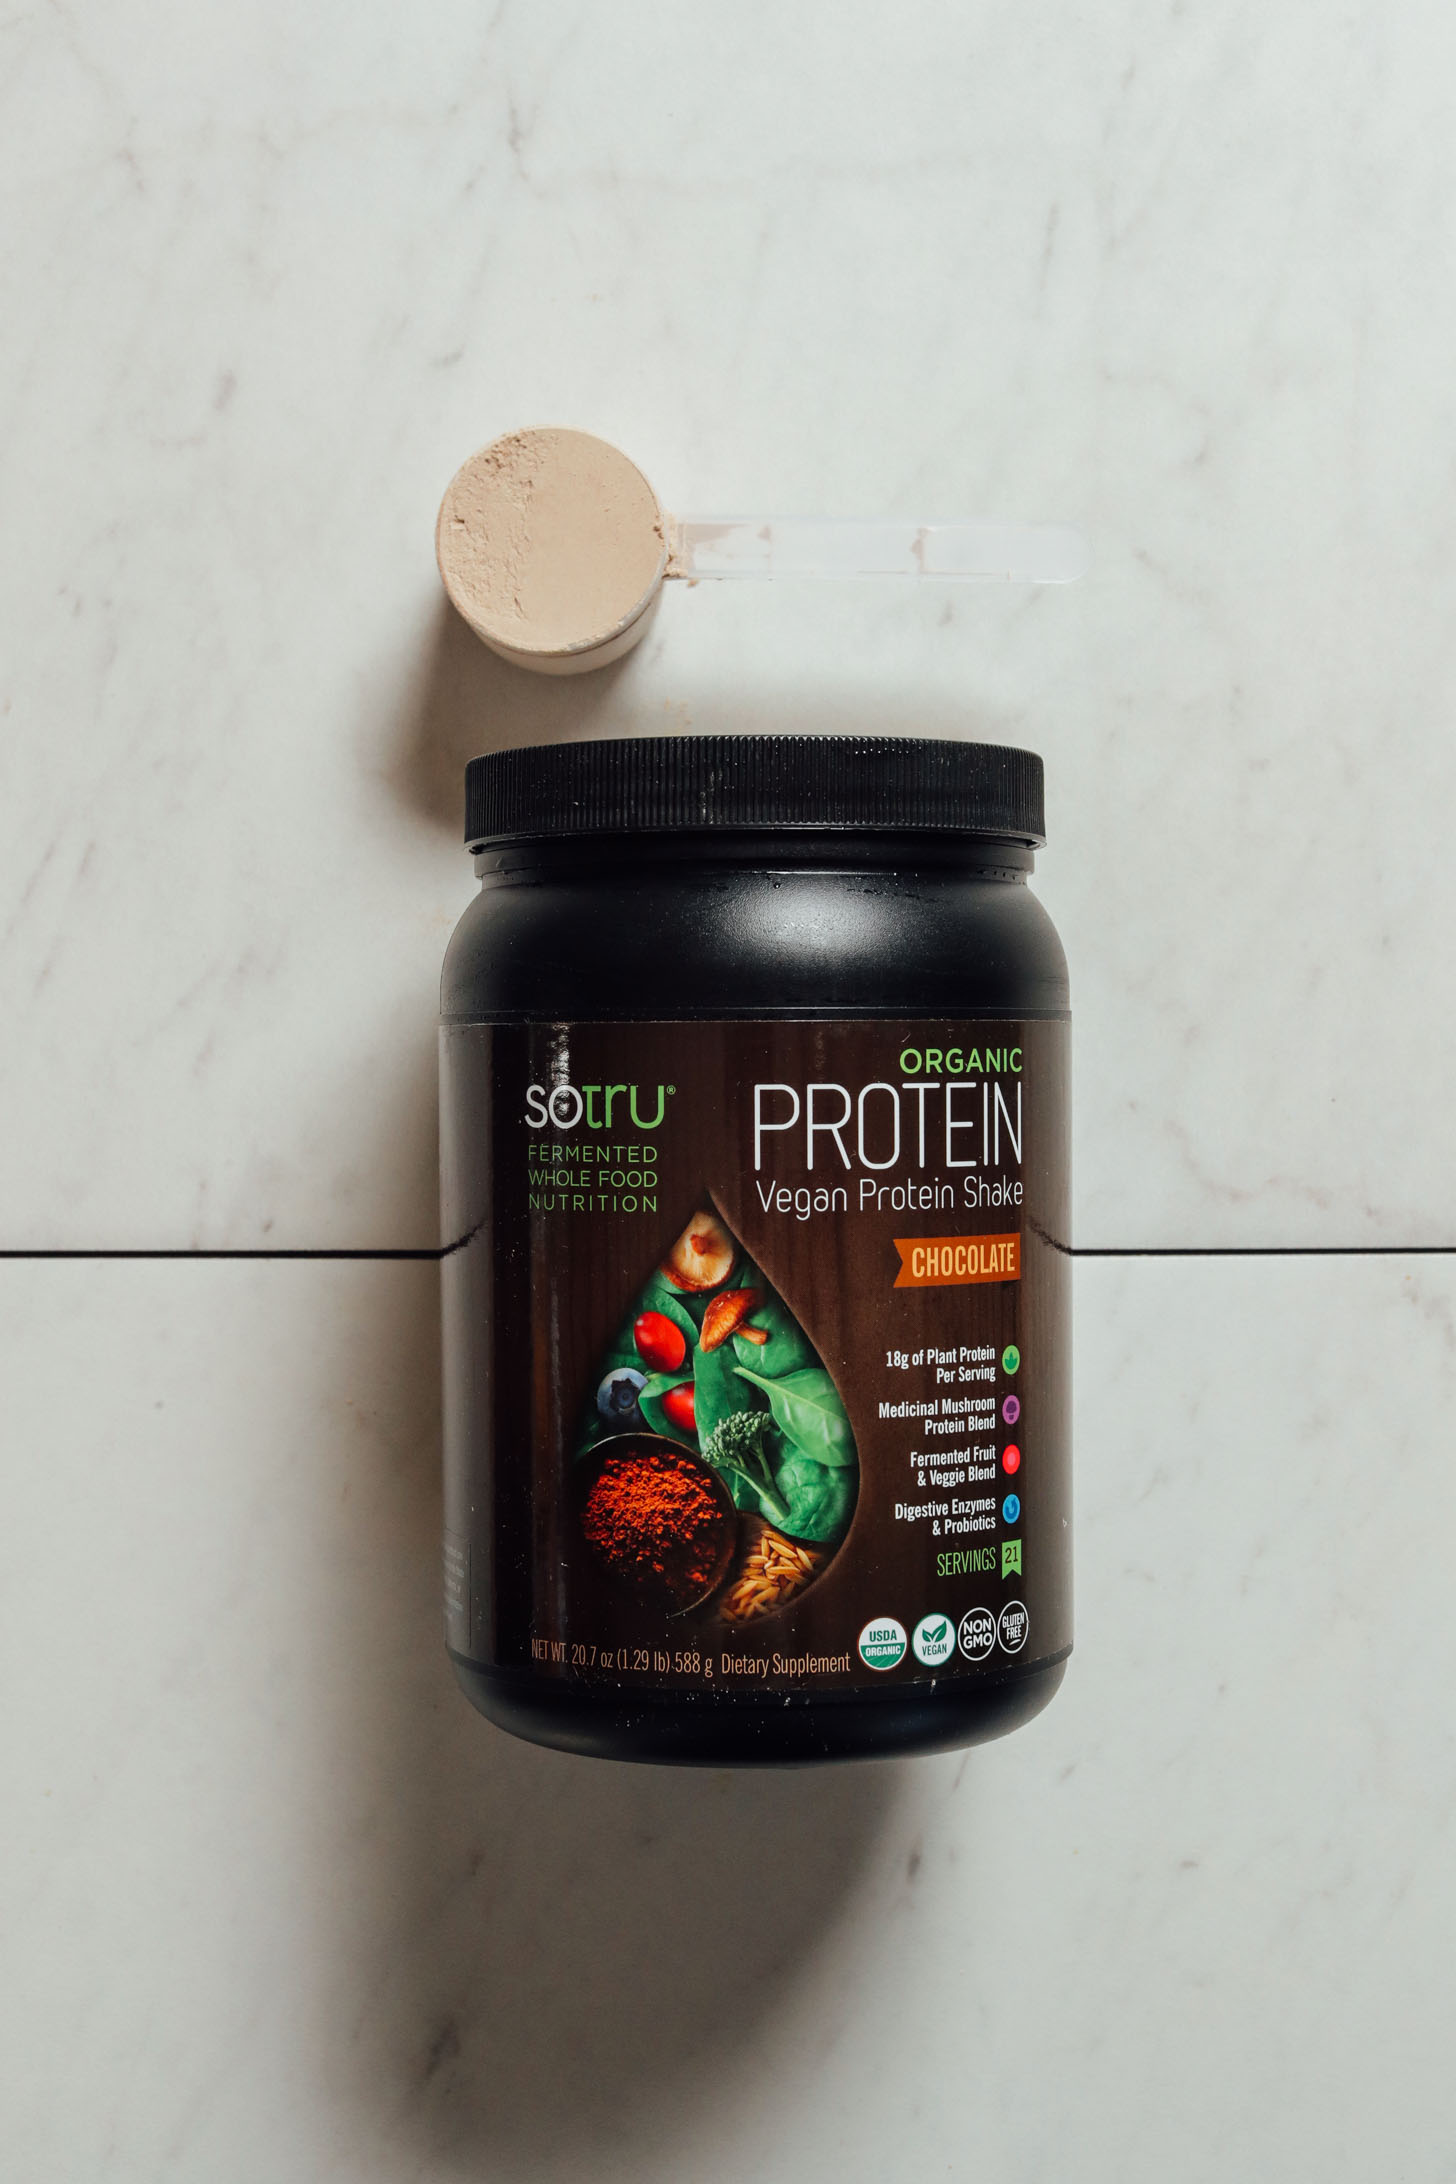 Tub of SoTru Vegan Protein for our chocolate protein powder review